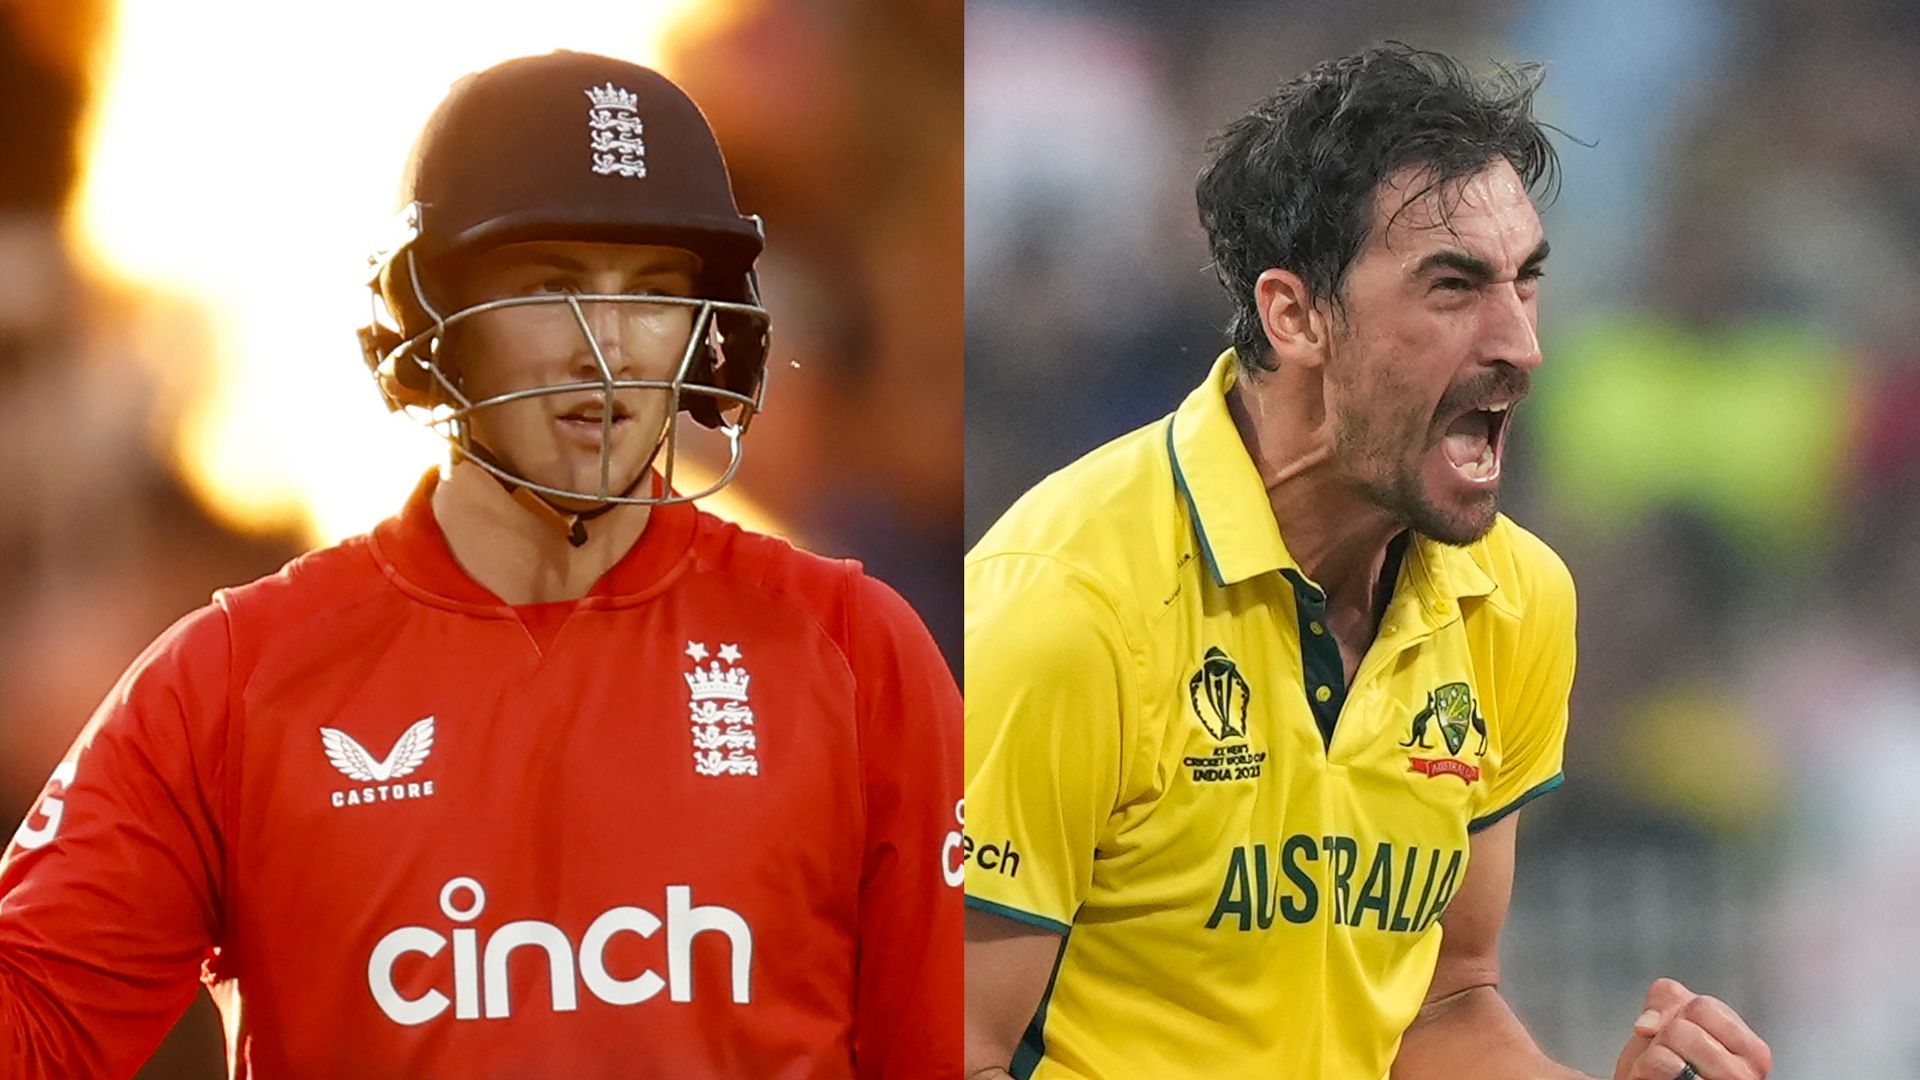 Brook signed by Delhi in IPL auction as Starc makes history